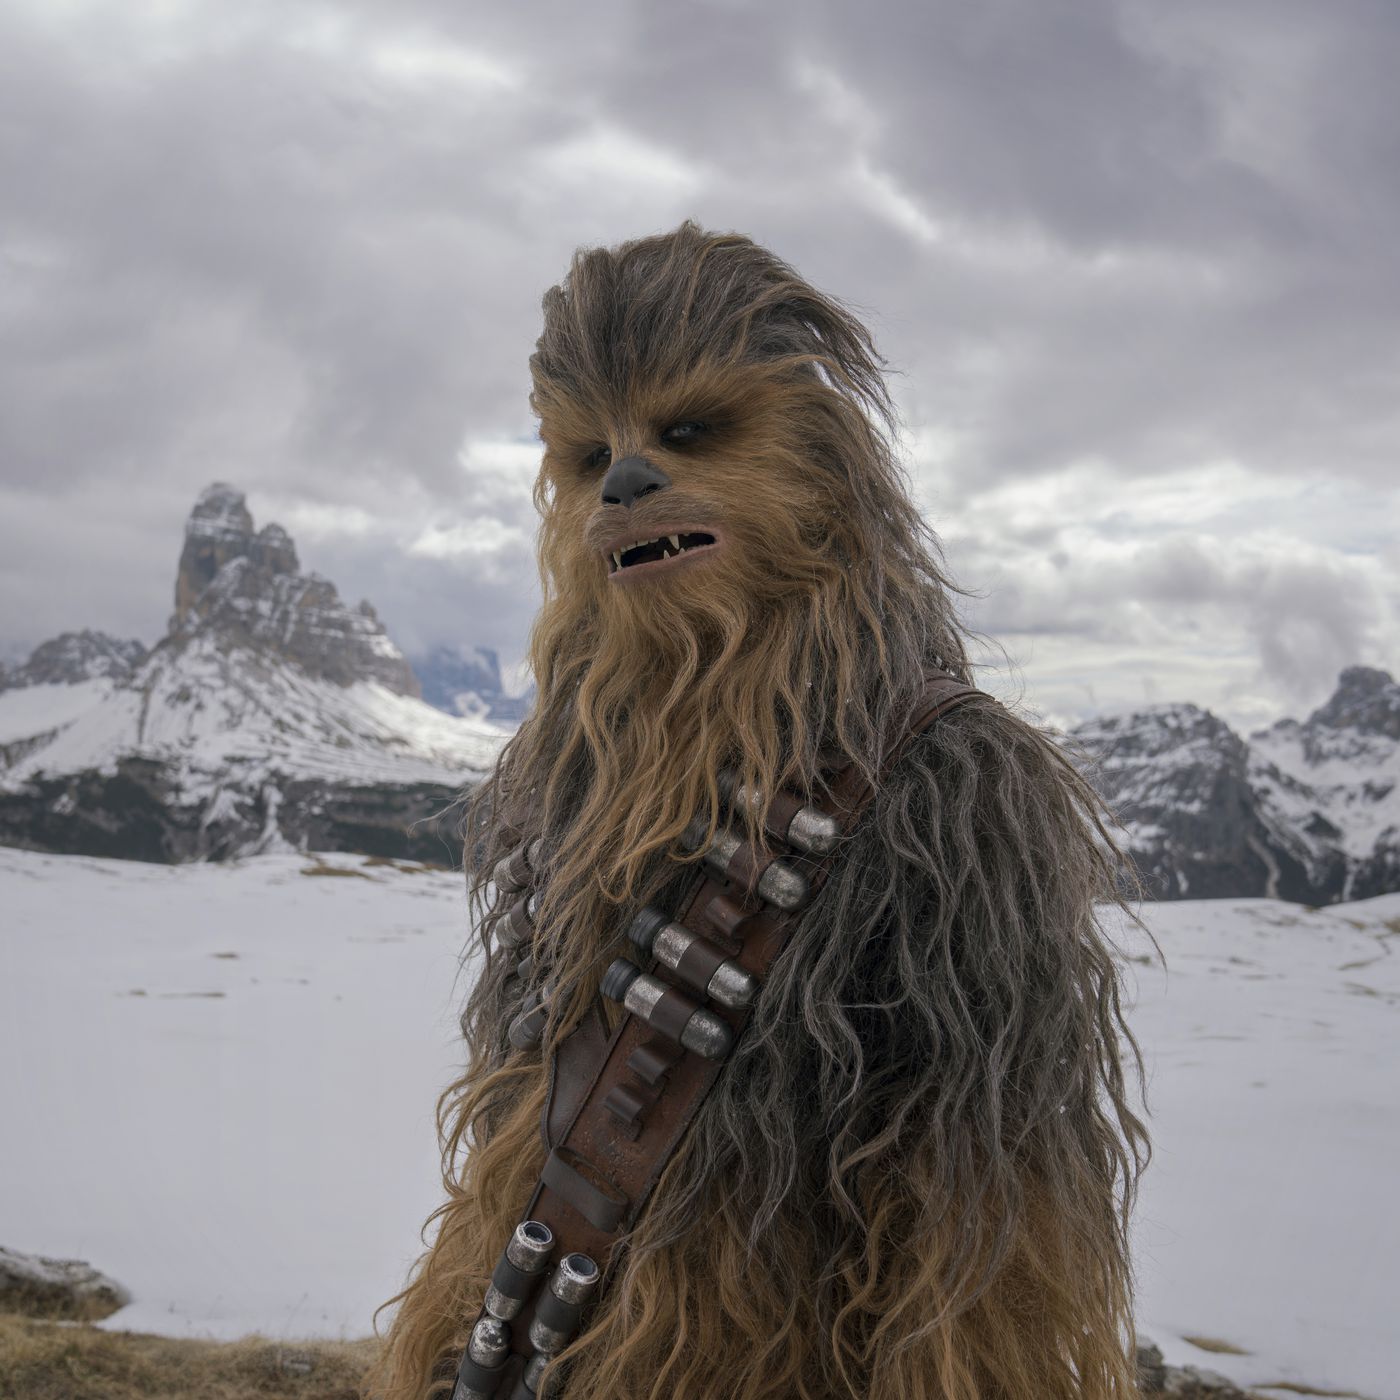 callie cat share pictures of chewy from star wars photos